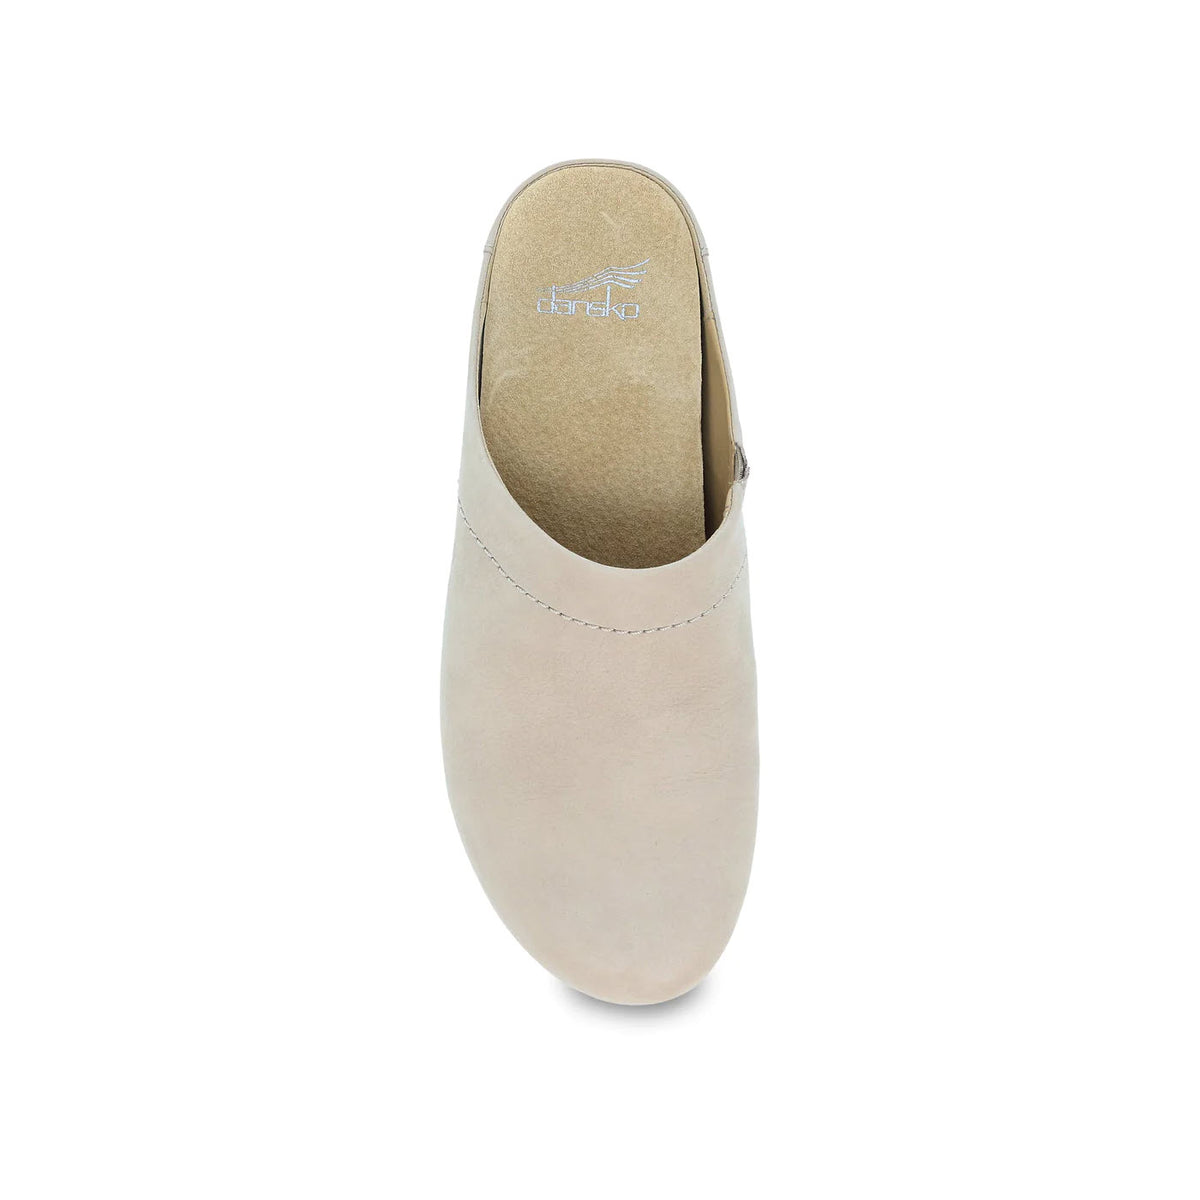 Top view of a light beige open-back clog with a smooth finish and a visible Dansko brand name on the insole.